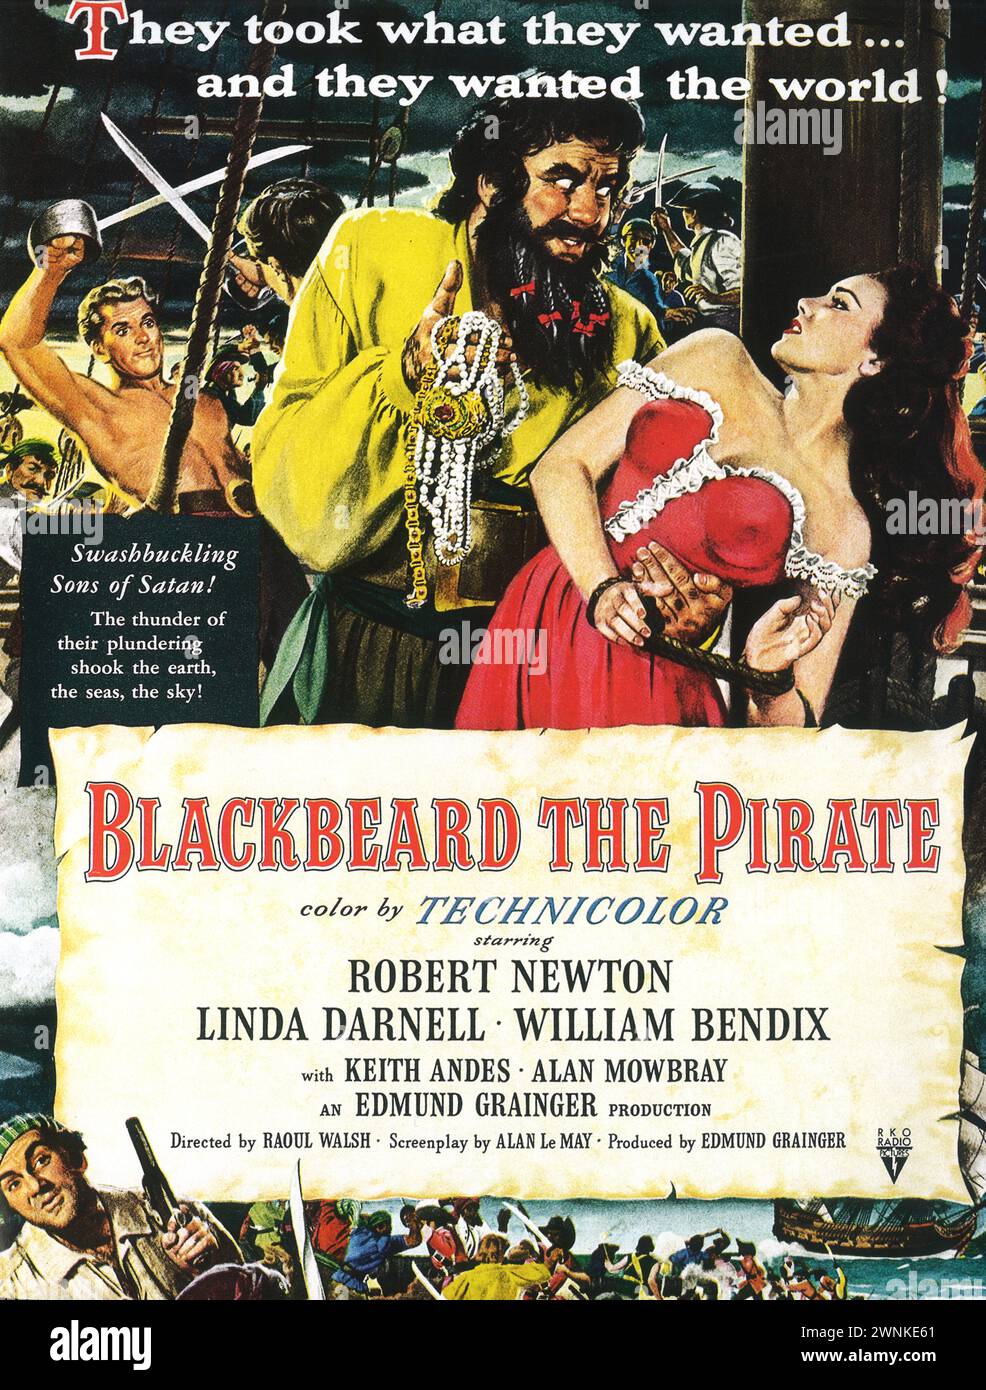 1952 Movie Poster Blackbeard The Pirate with Keith Andes Robert Newton Linda Darnell William Bendix directed by Raoul Walsh, RKO Stock Photo